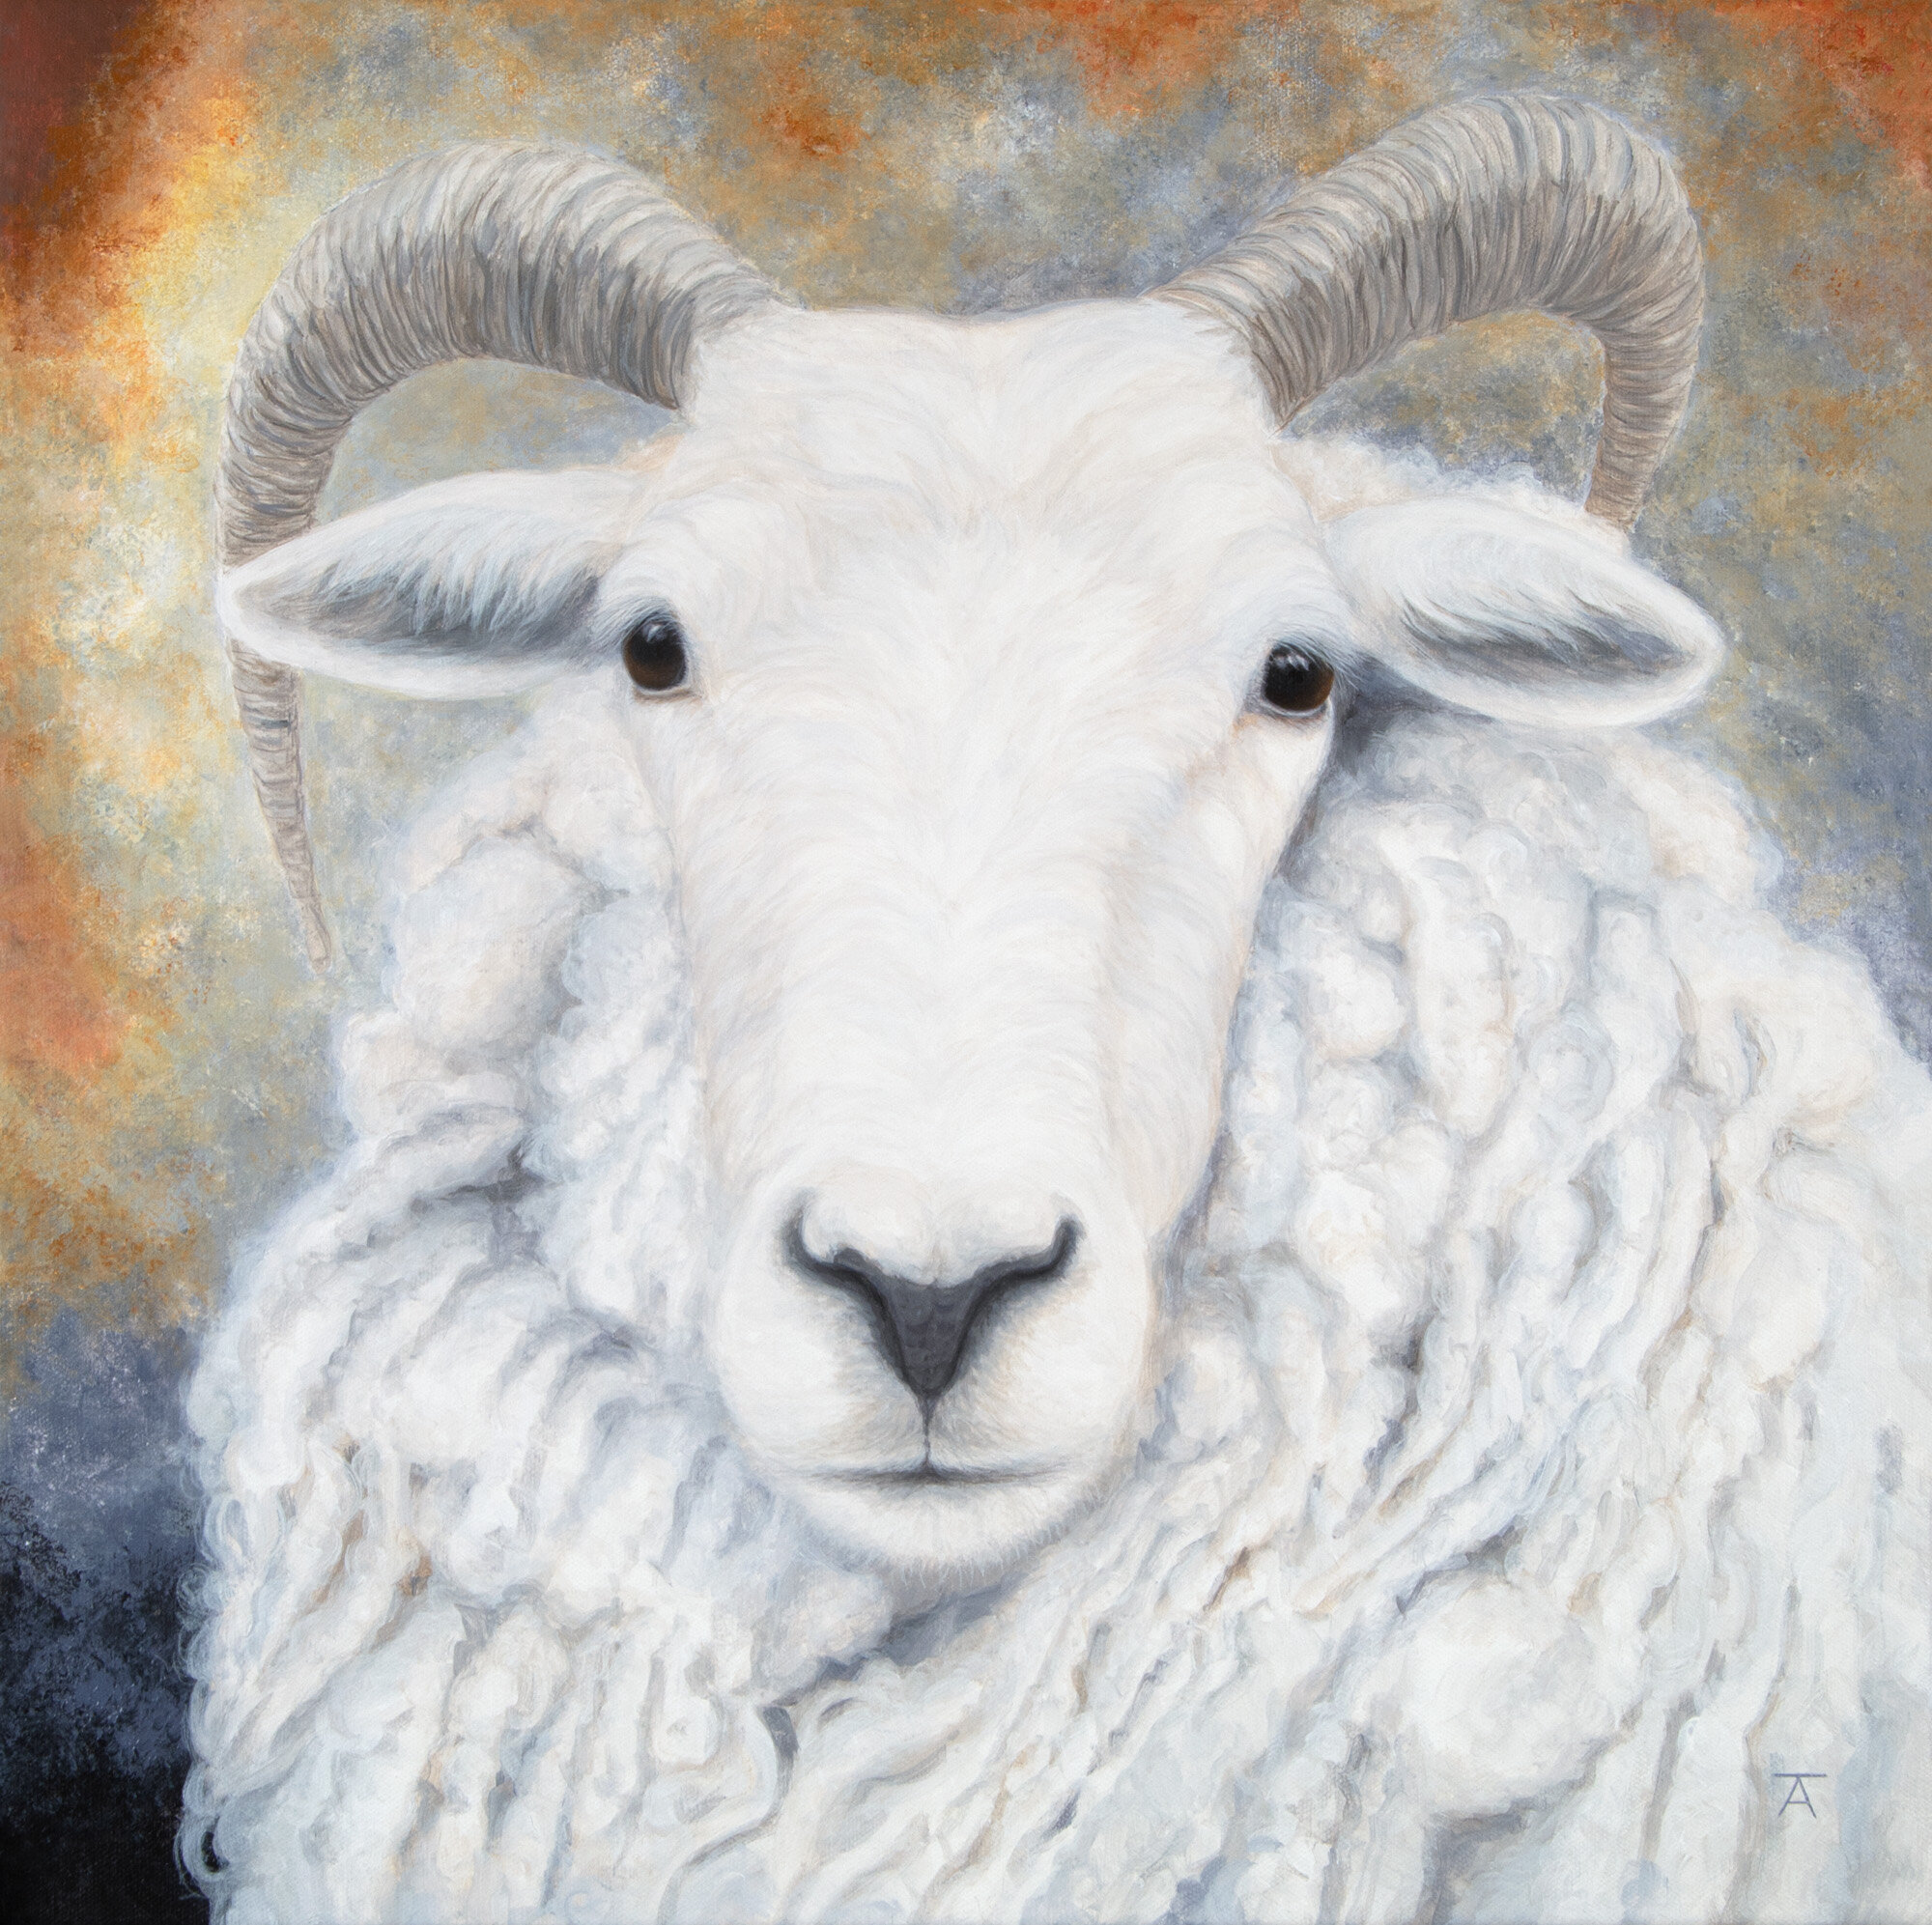 ewe are the sunshine of my life - sold